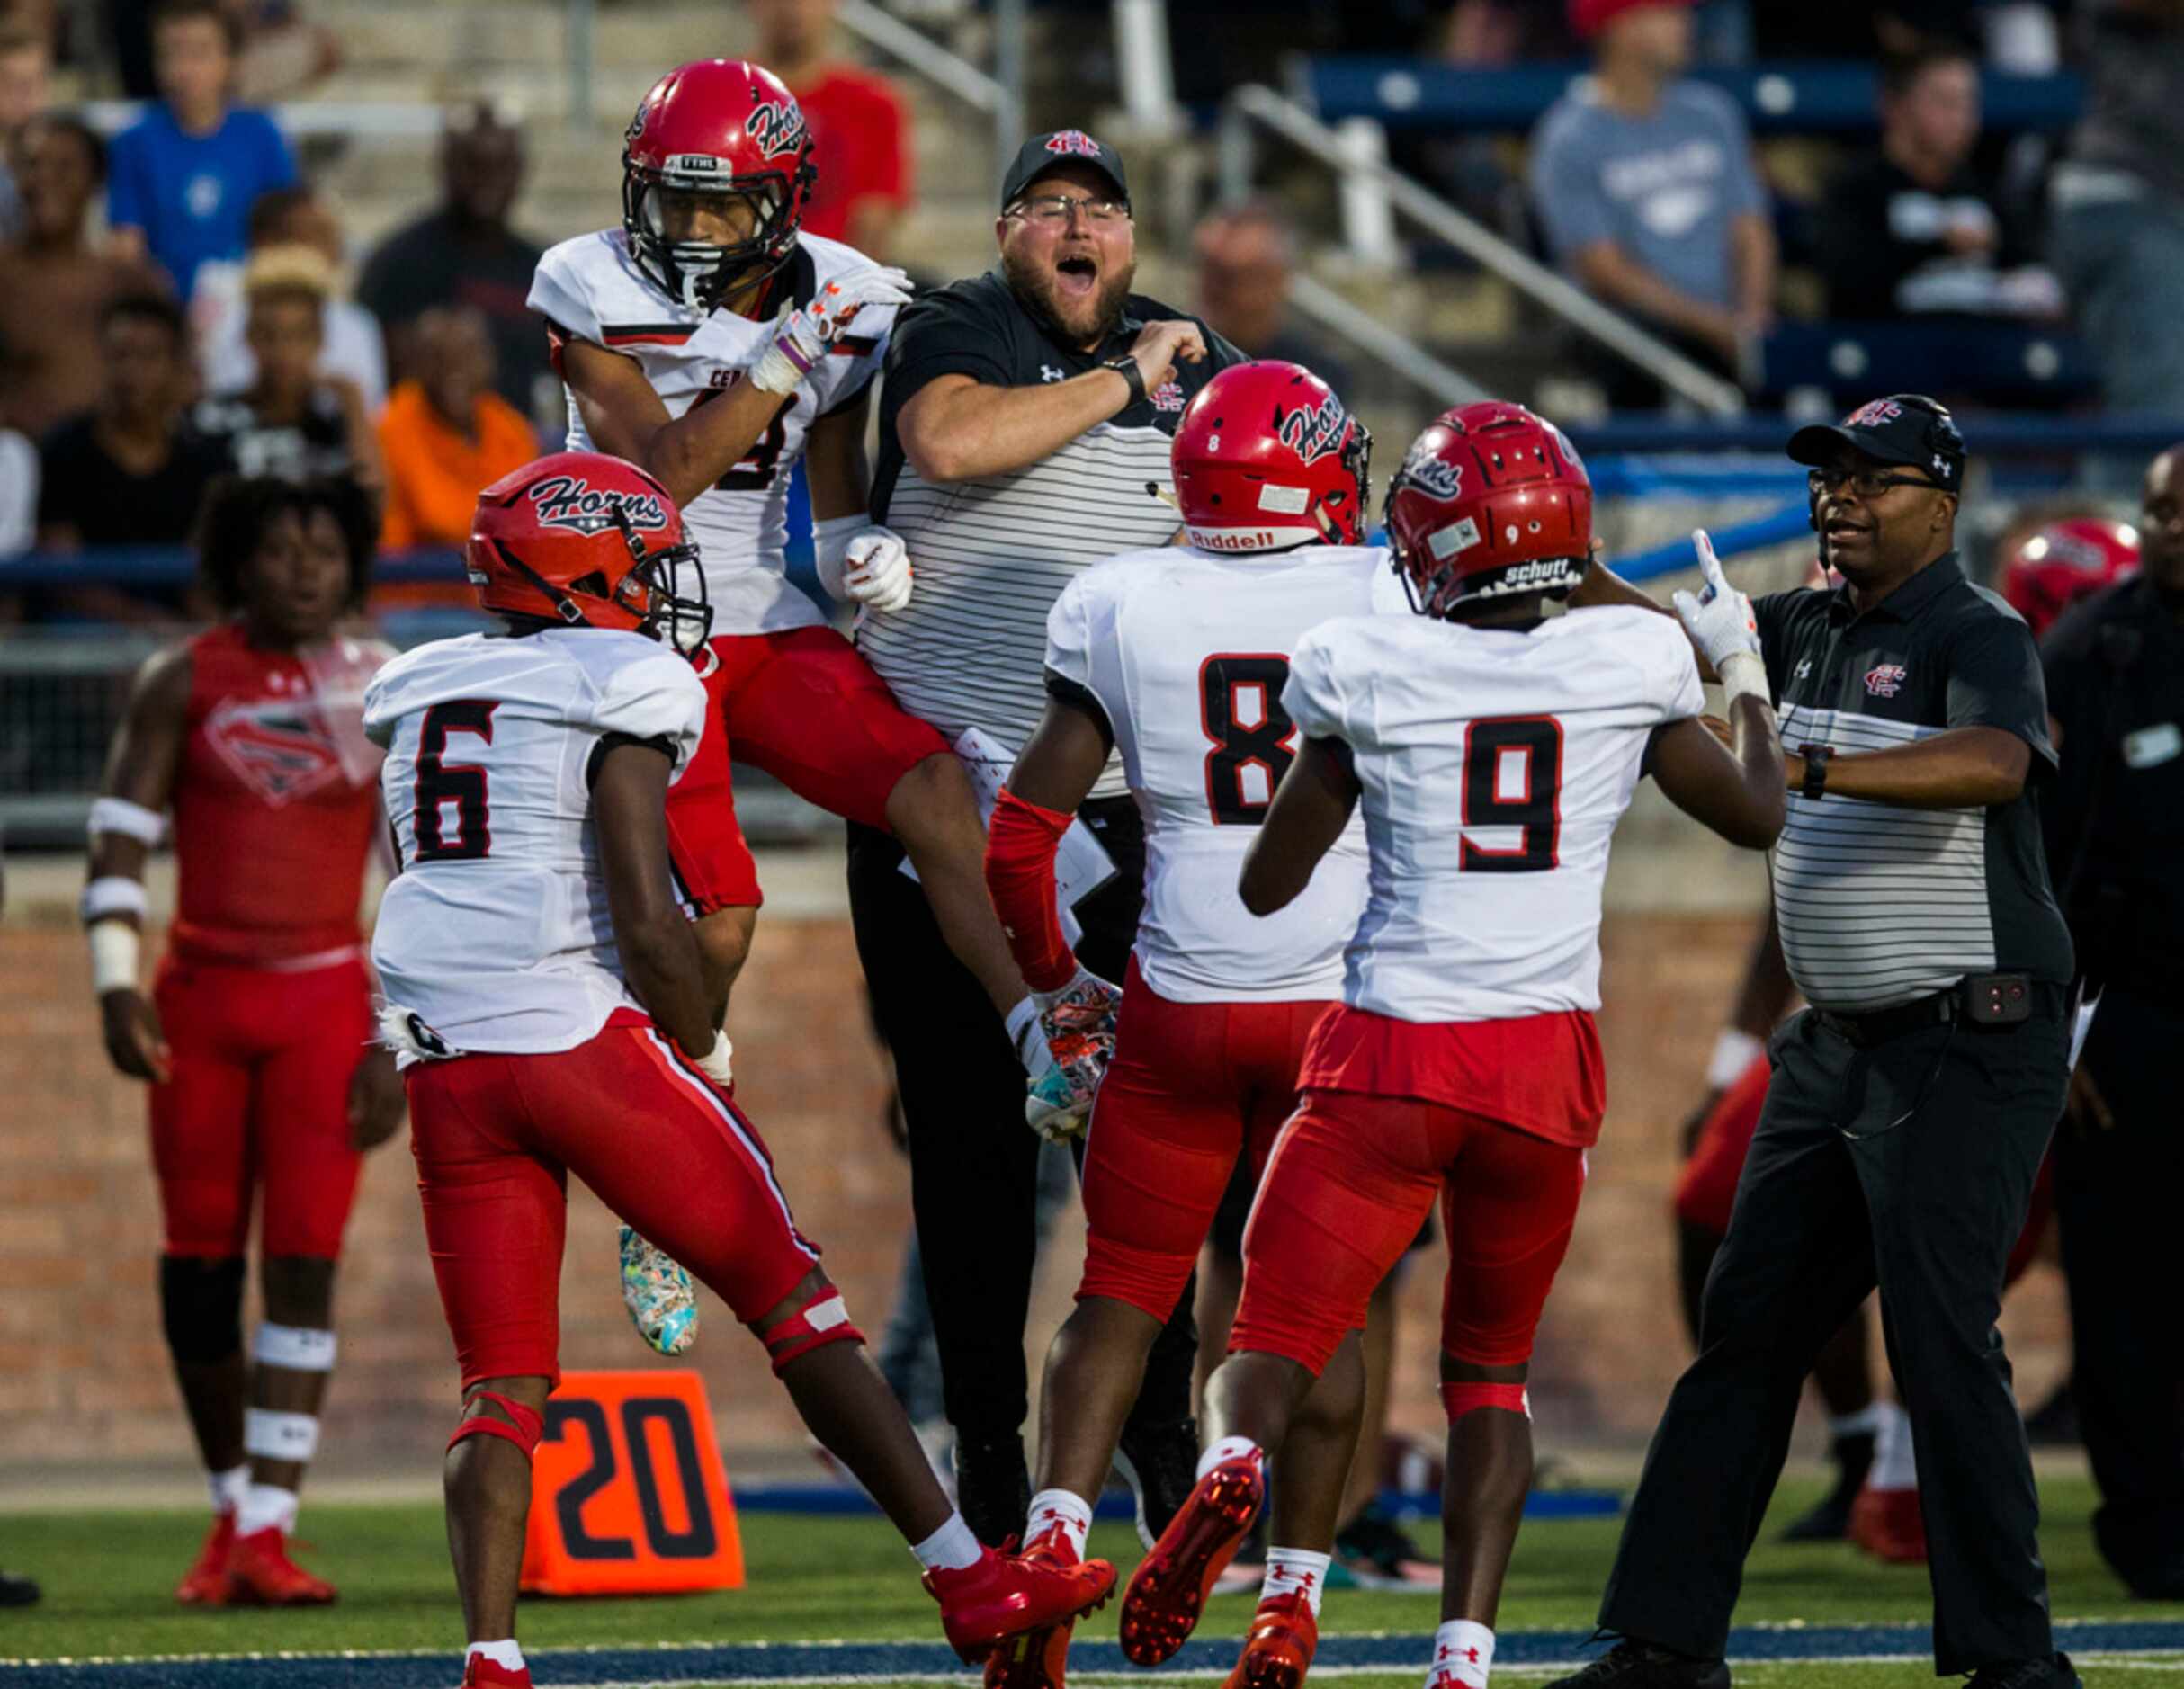 Cedar Hill cornerback Jalon Peoples (19) celebrates after an interception in the end zone...